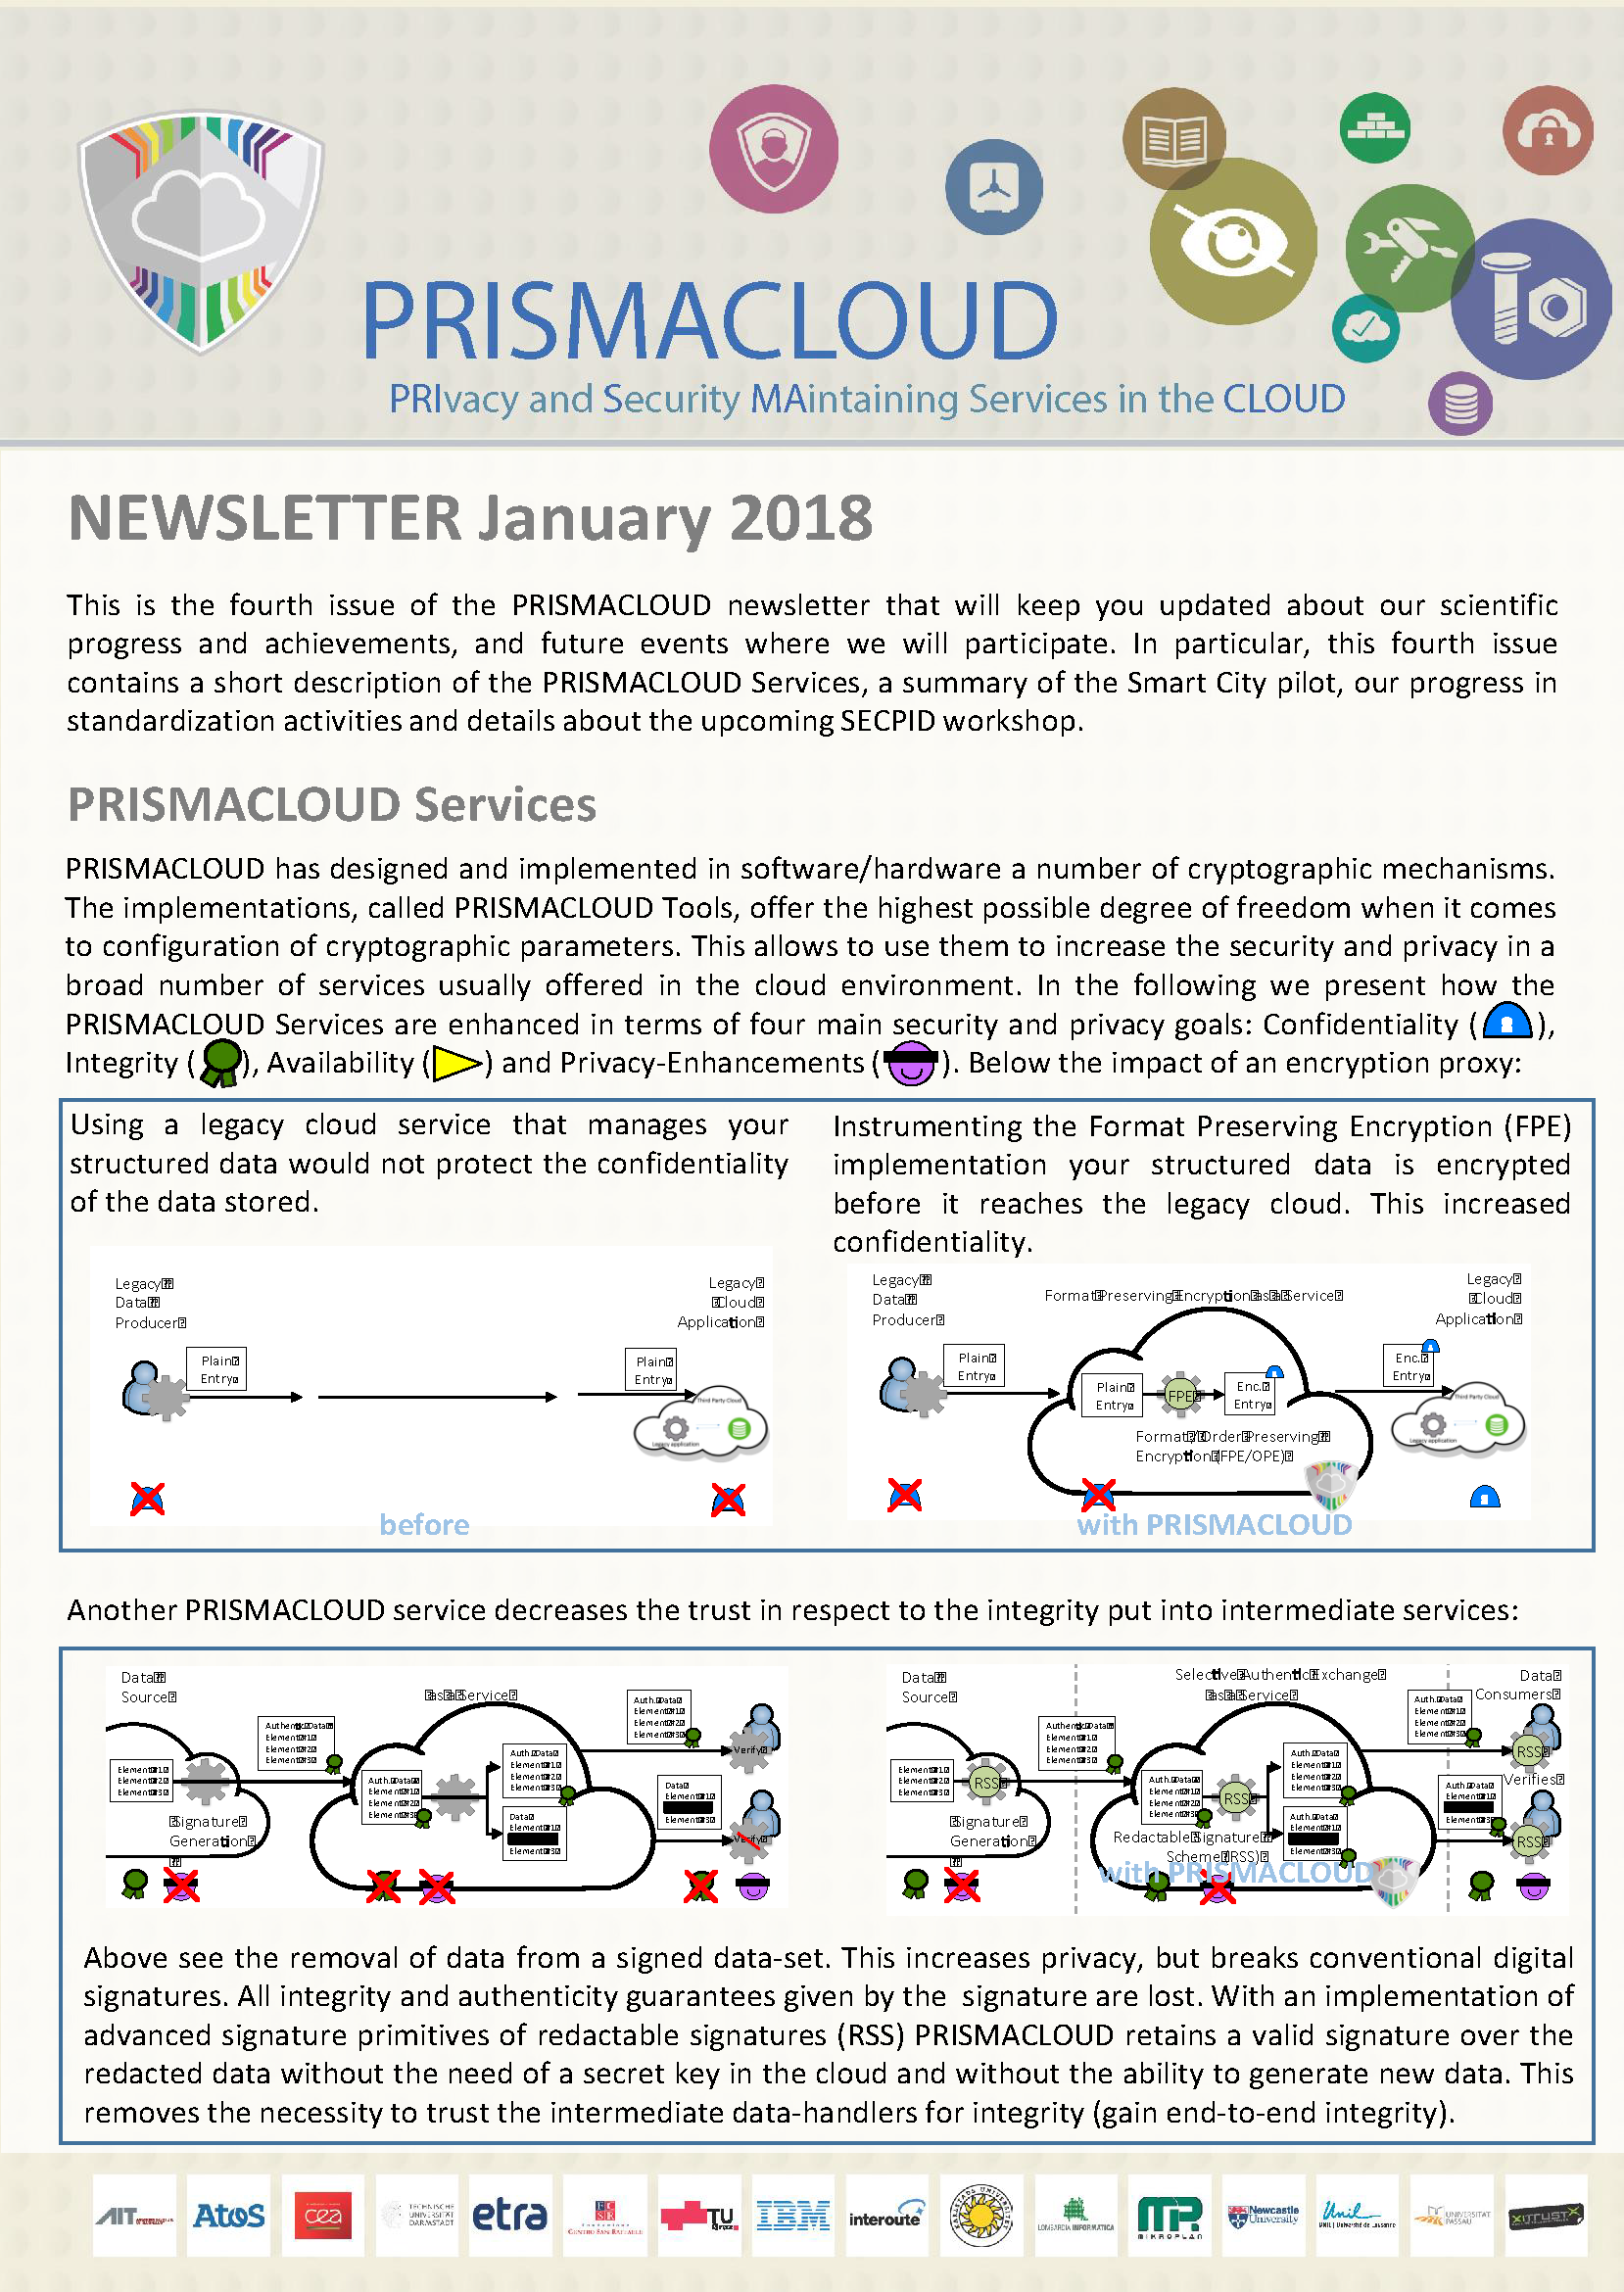 4th PRISMACLOUD Newsletter - January 2018